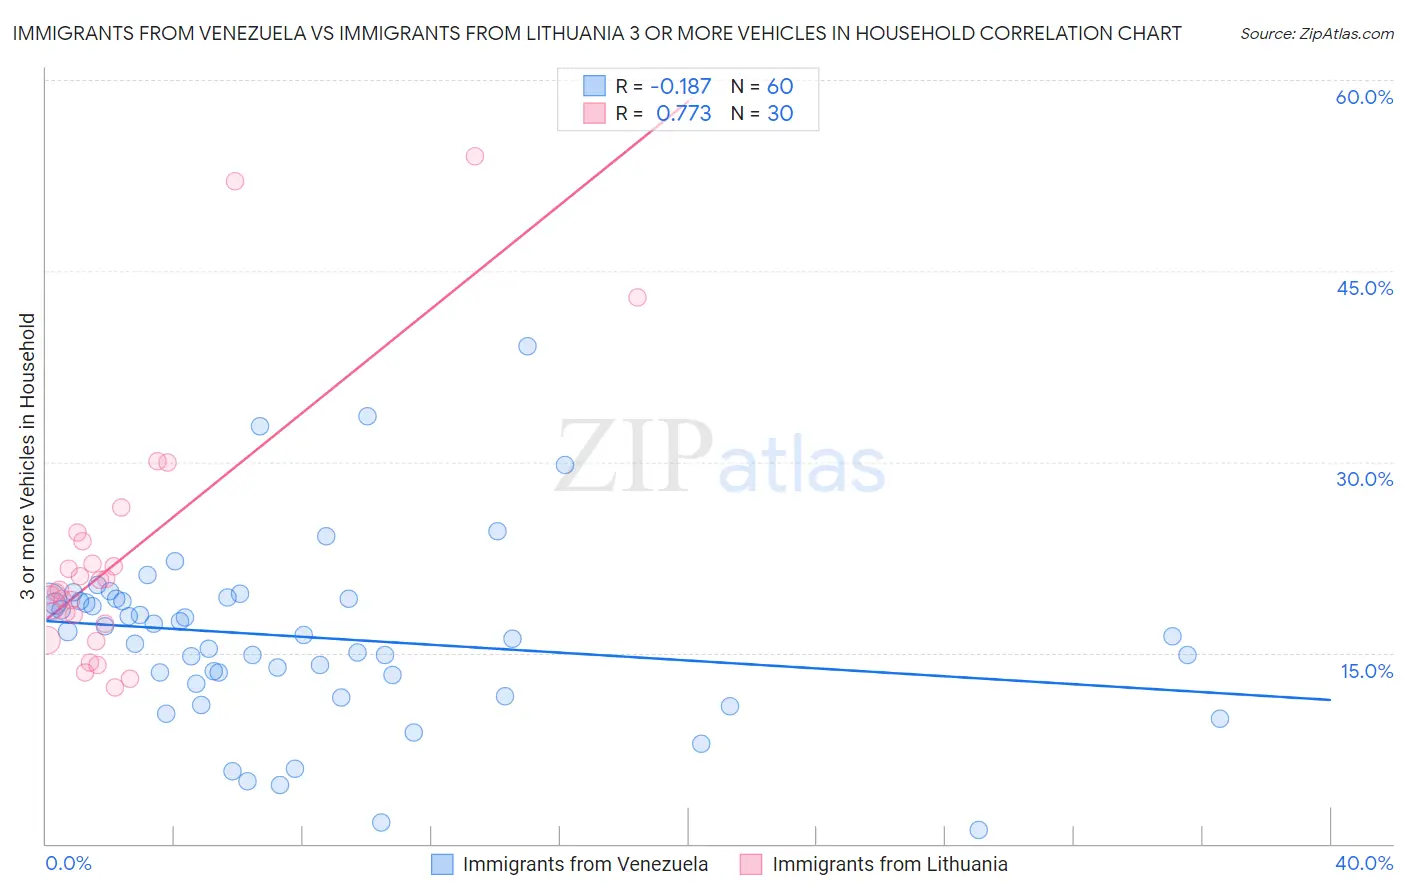 Immigrants from Venezuela vs Immigrants from Lithuania 3 or more Vehicles in Household